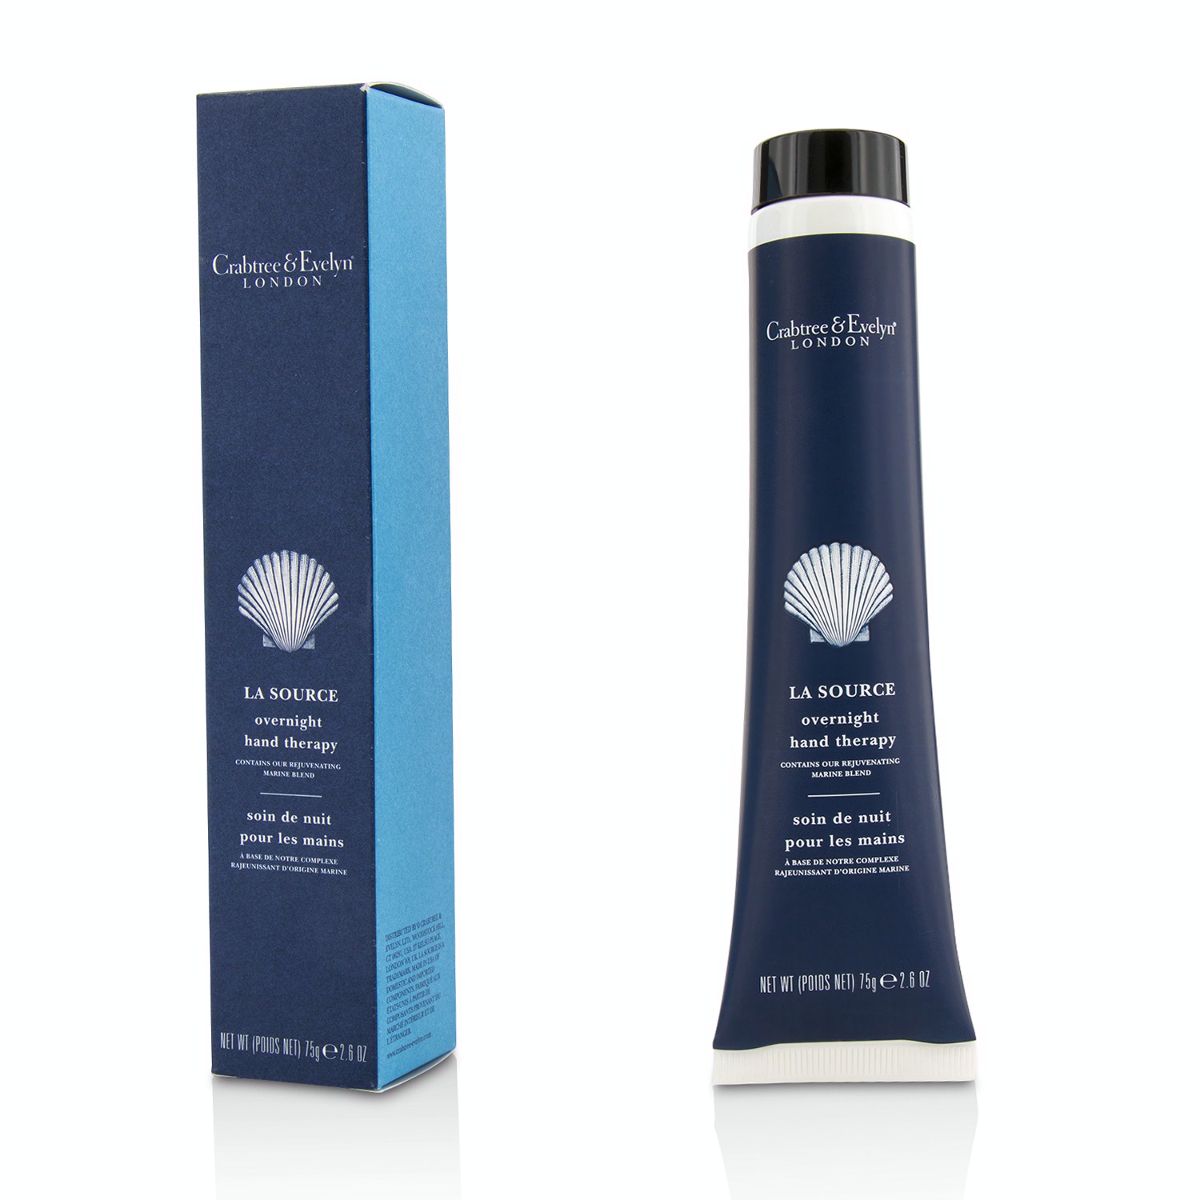 La Source Overnight Hand Therapy 34419 Crabtree & Evelyn Image